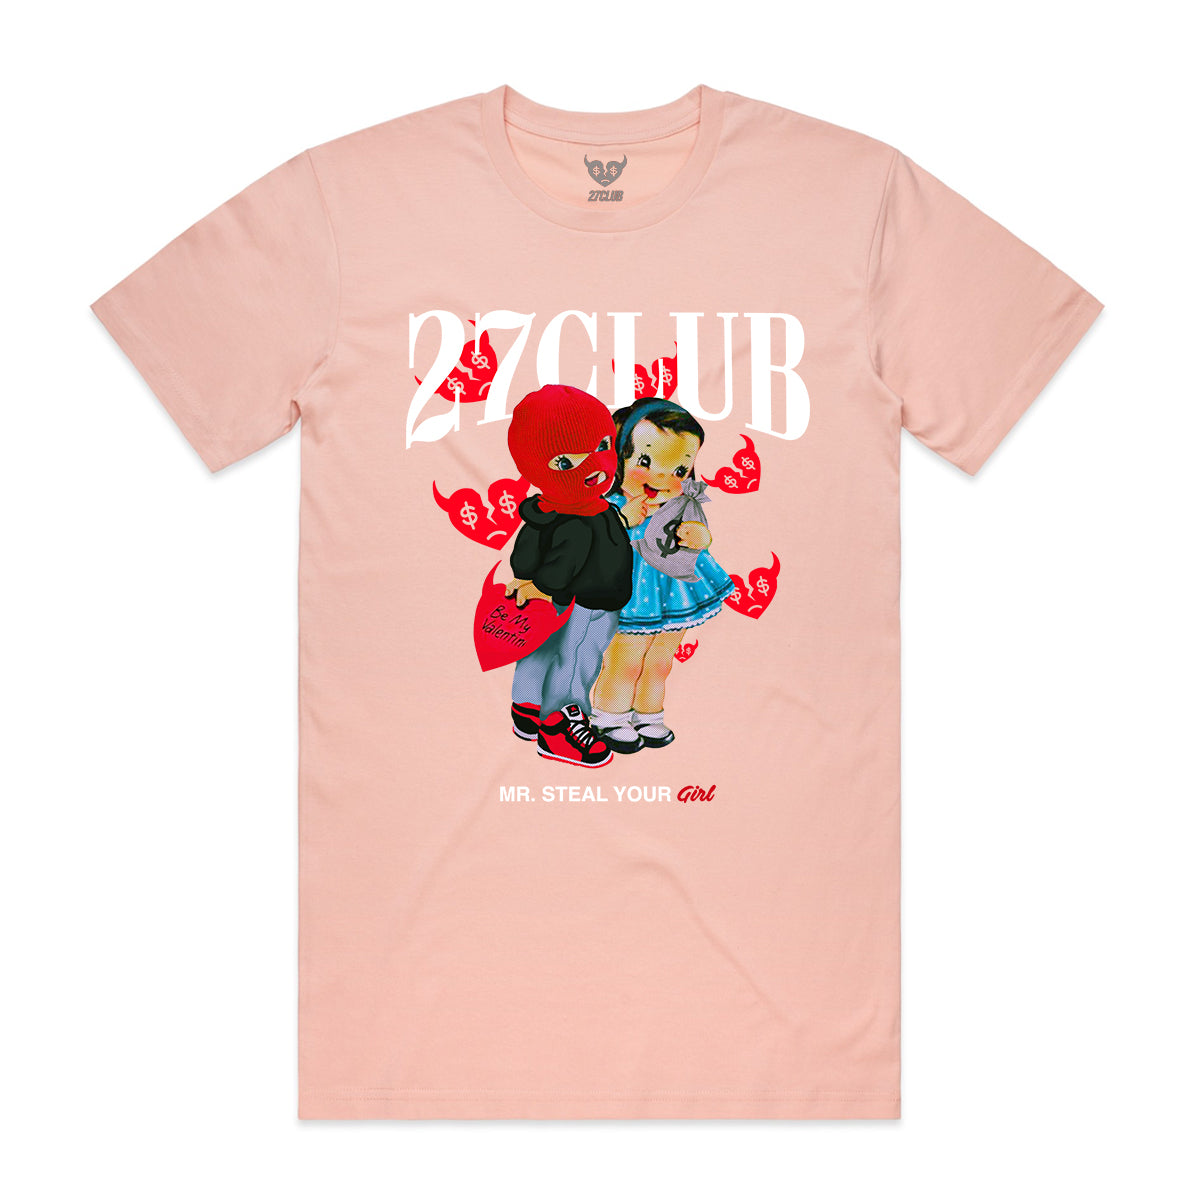 Mr Steal Your Girl - Tee